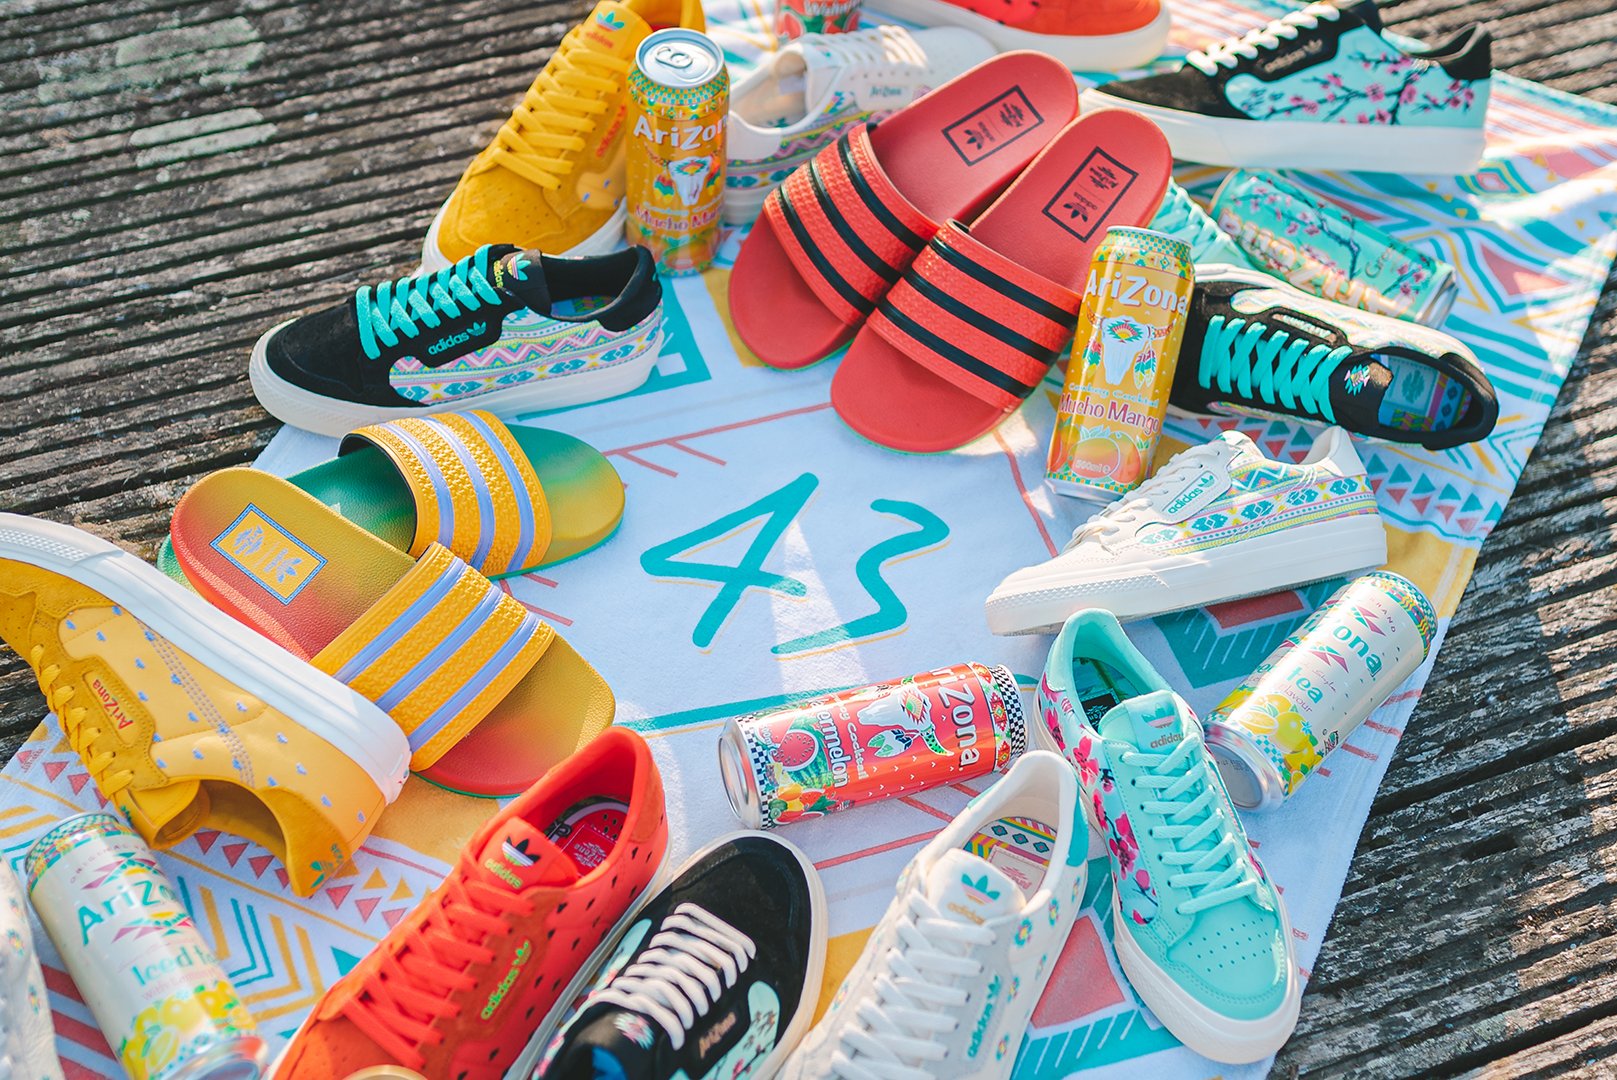 43einhalb on X: "»Who's AriZona Iced Tea and @adidasoriginals are back again! Made up of co-branded takes on the Continental Vulc plus four Adilette slides, each design interprets AriZona's